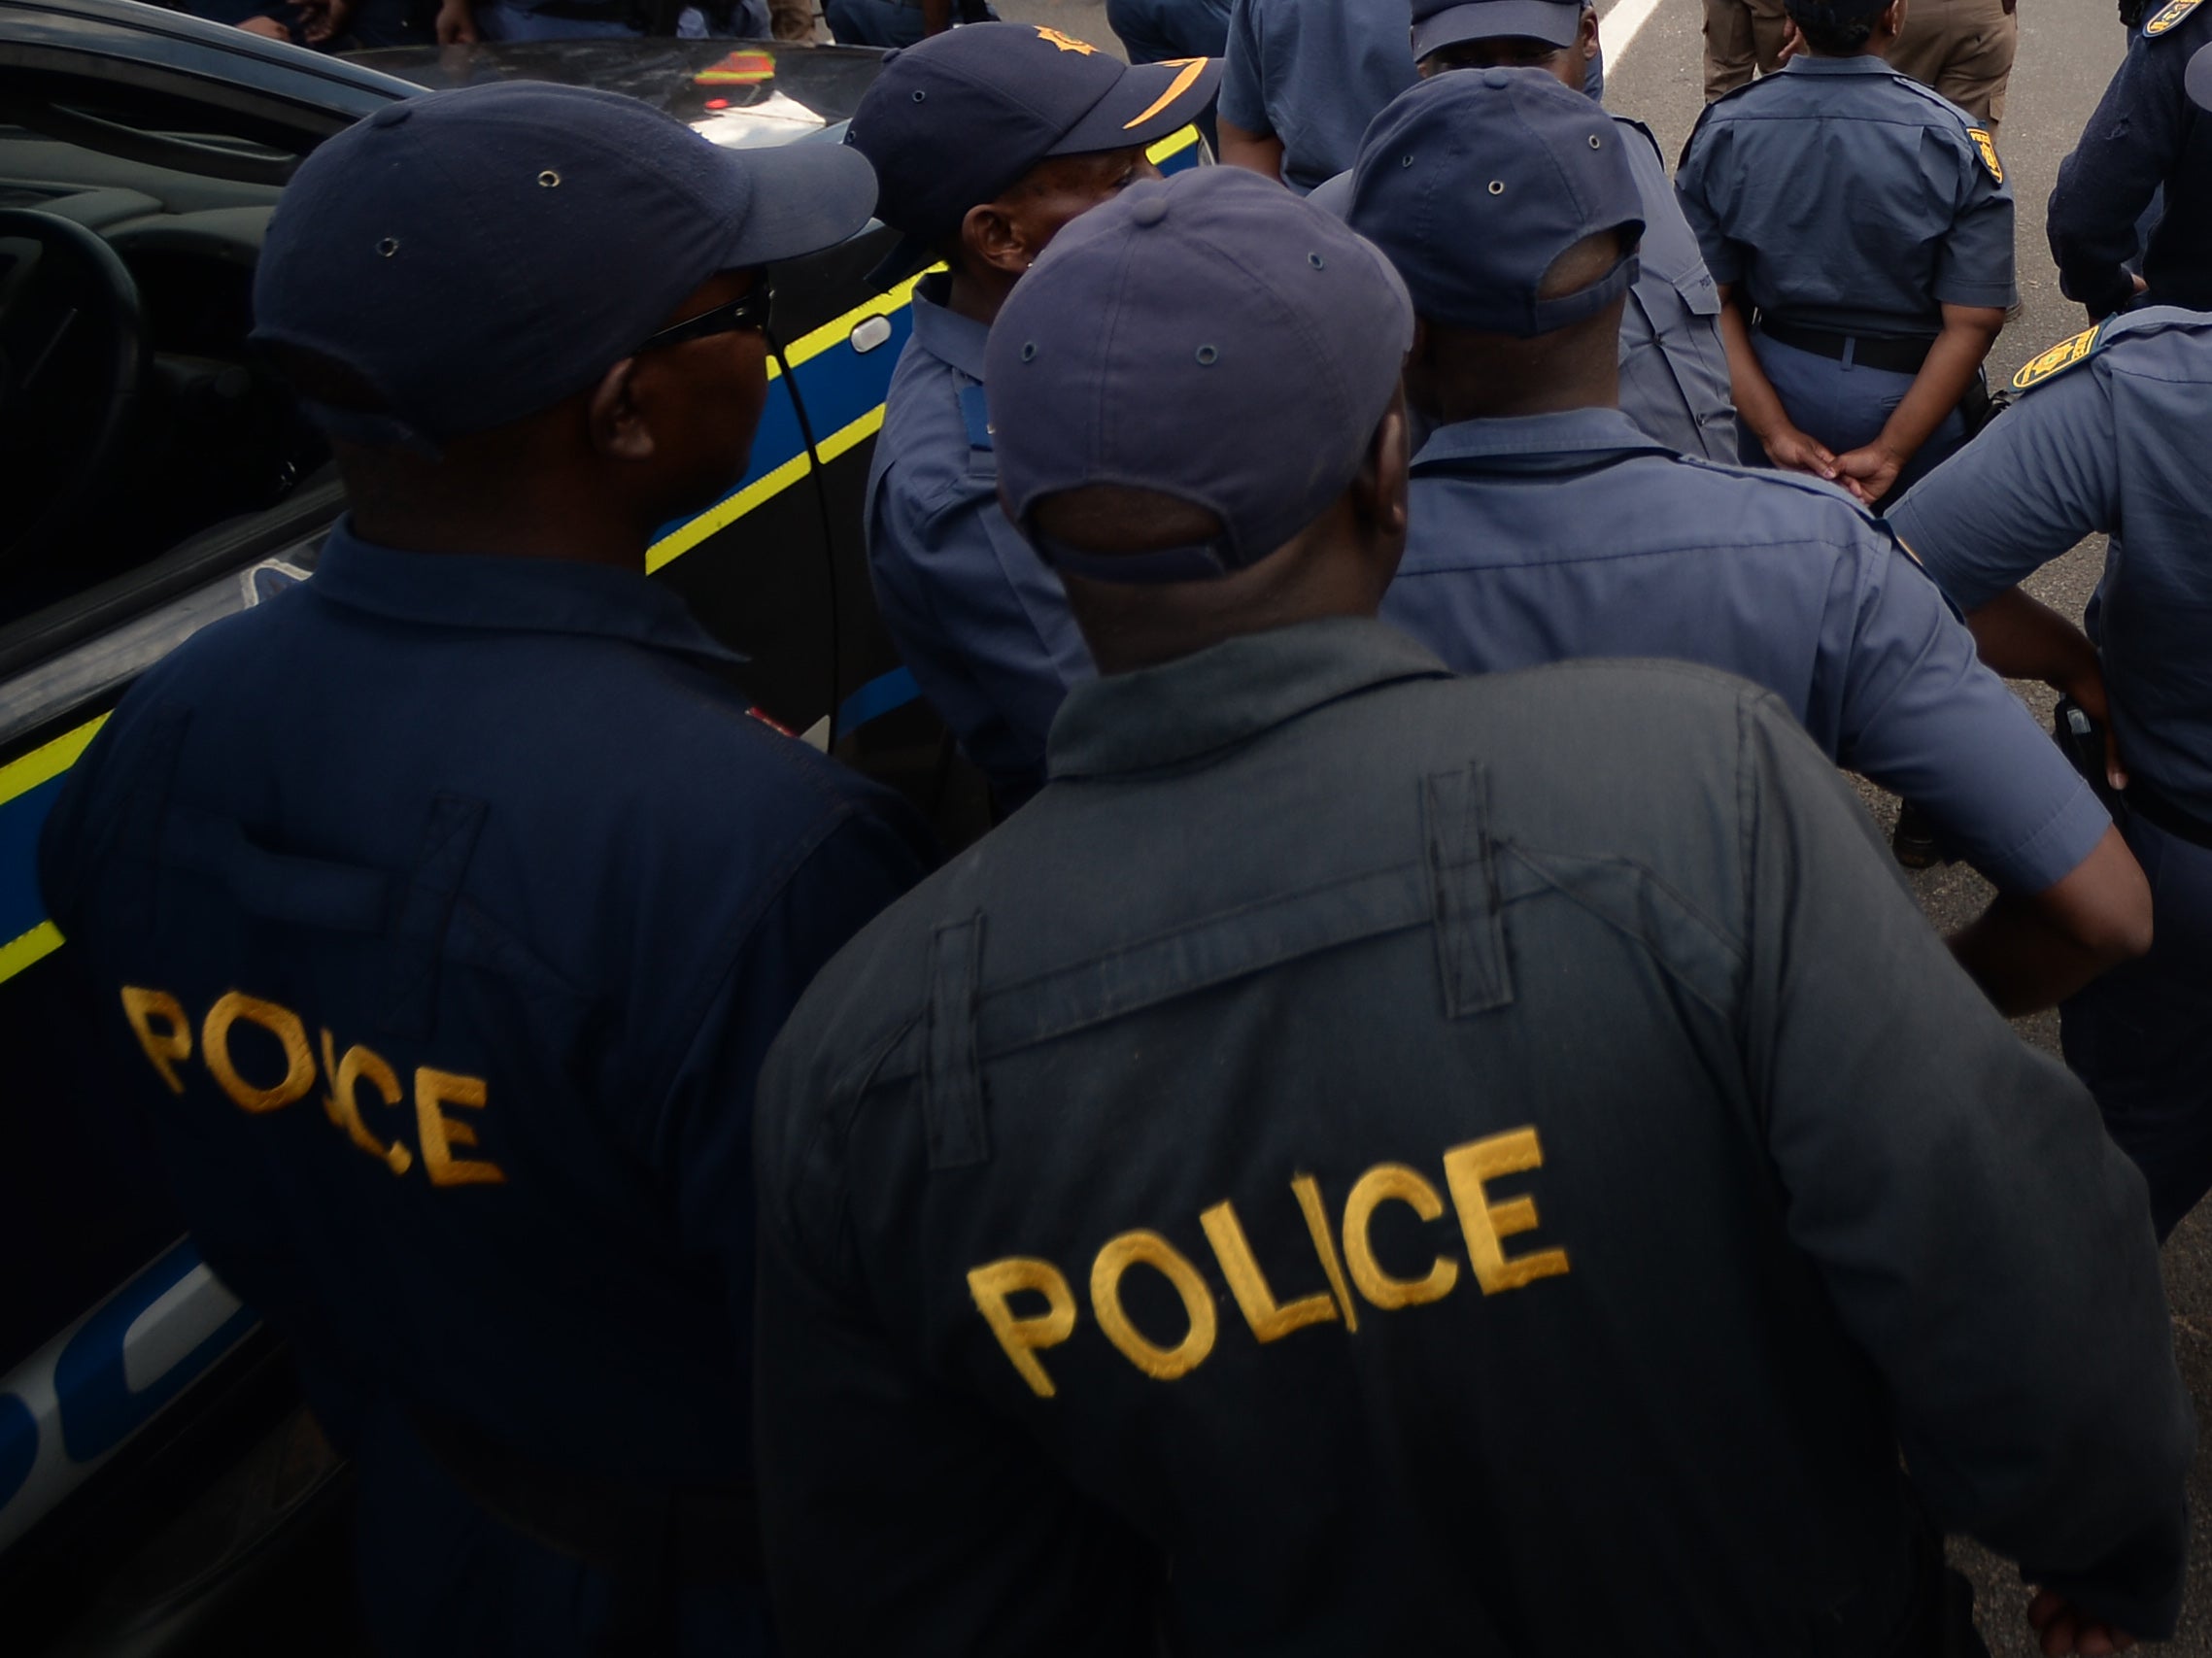 South African police have opened a murder inquiry and a rape investigation